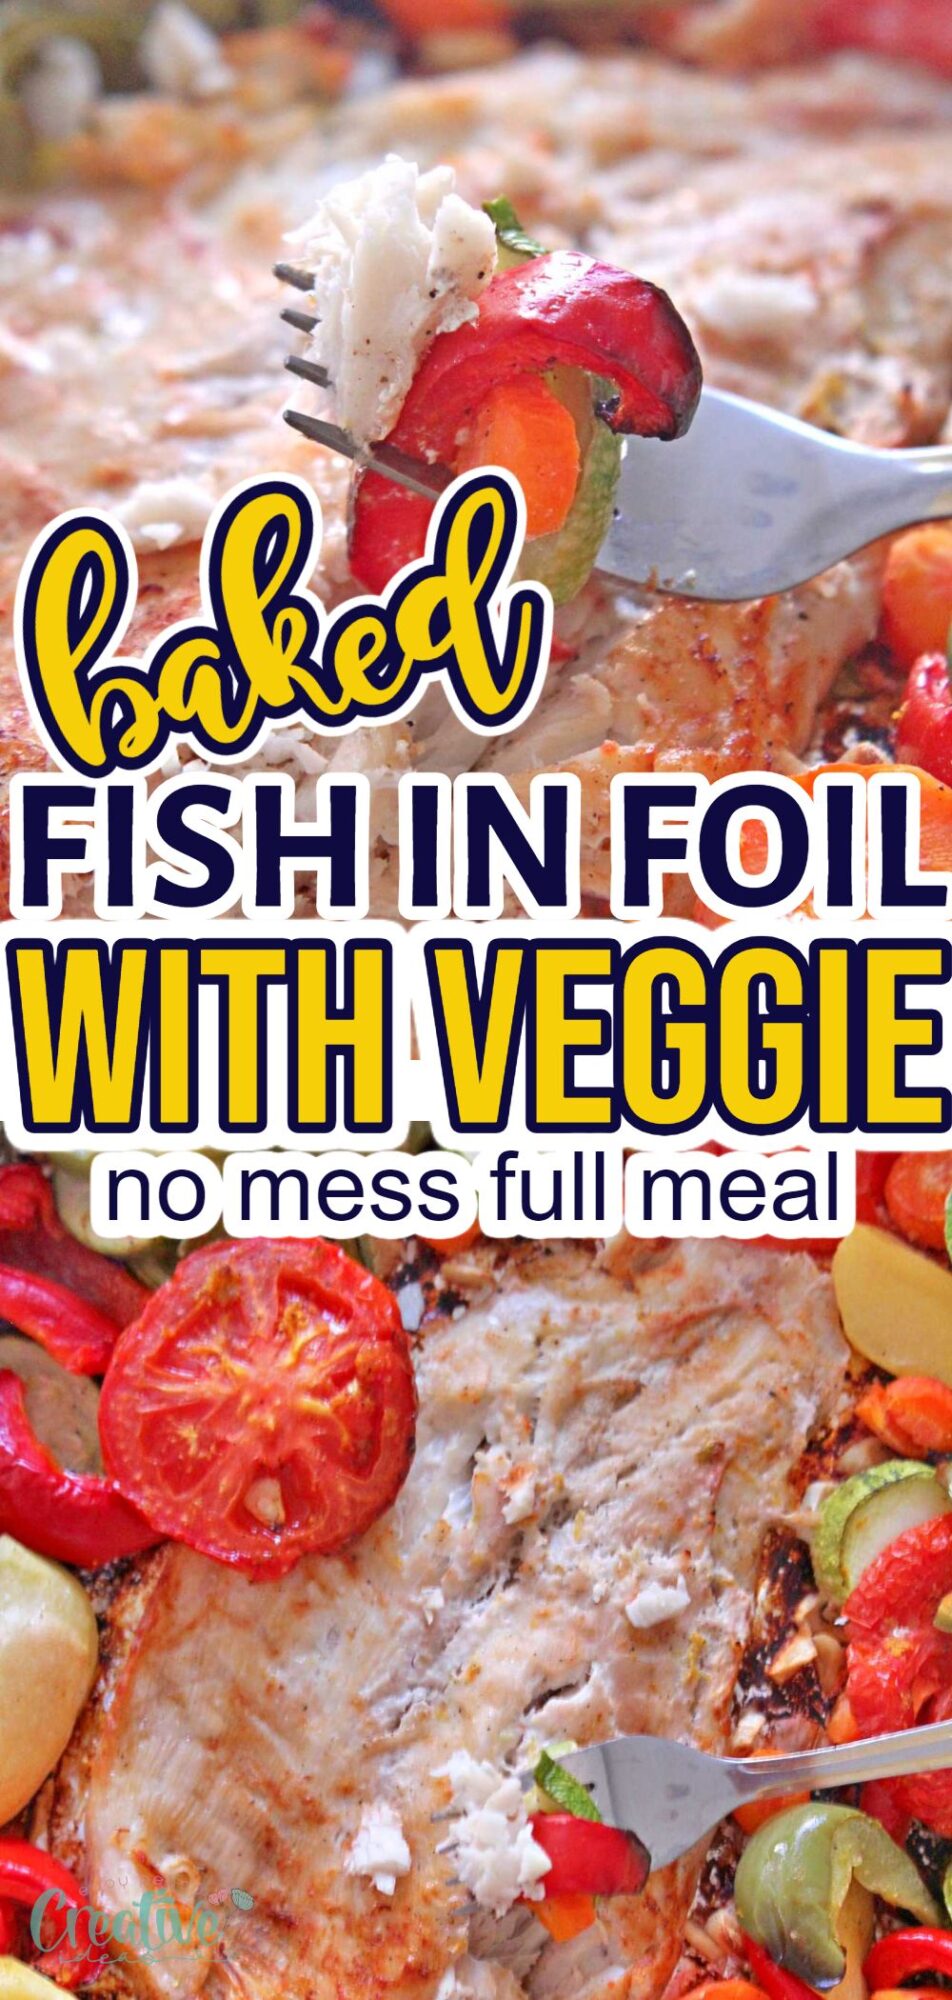 Delicious and healthy baked fish in foil! Bursting with flavors and colorful veggies, this simple yet fancy meal is ready in just 30 minutes. No cleanup needed, it's like a restaurant-quality dish!